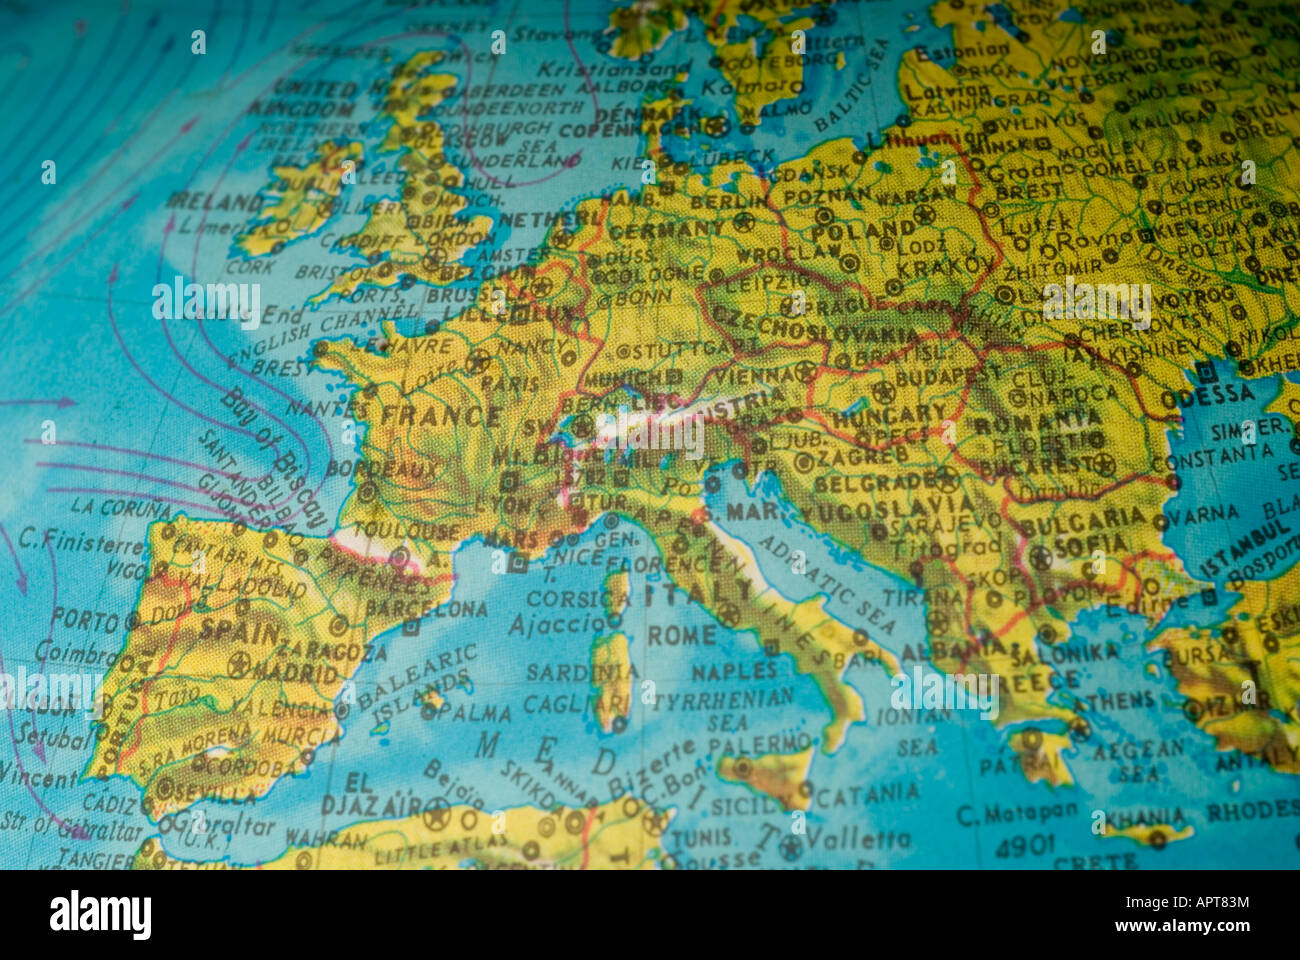 Image of a map of Europe Stock Photo